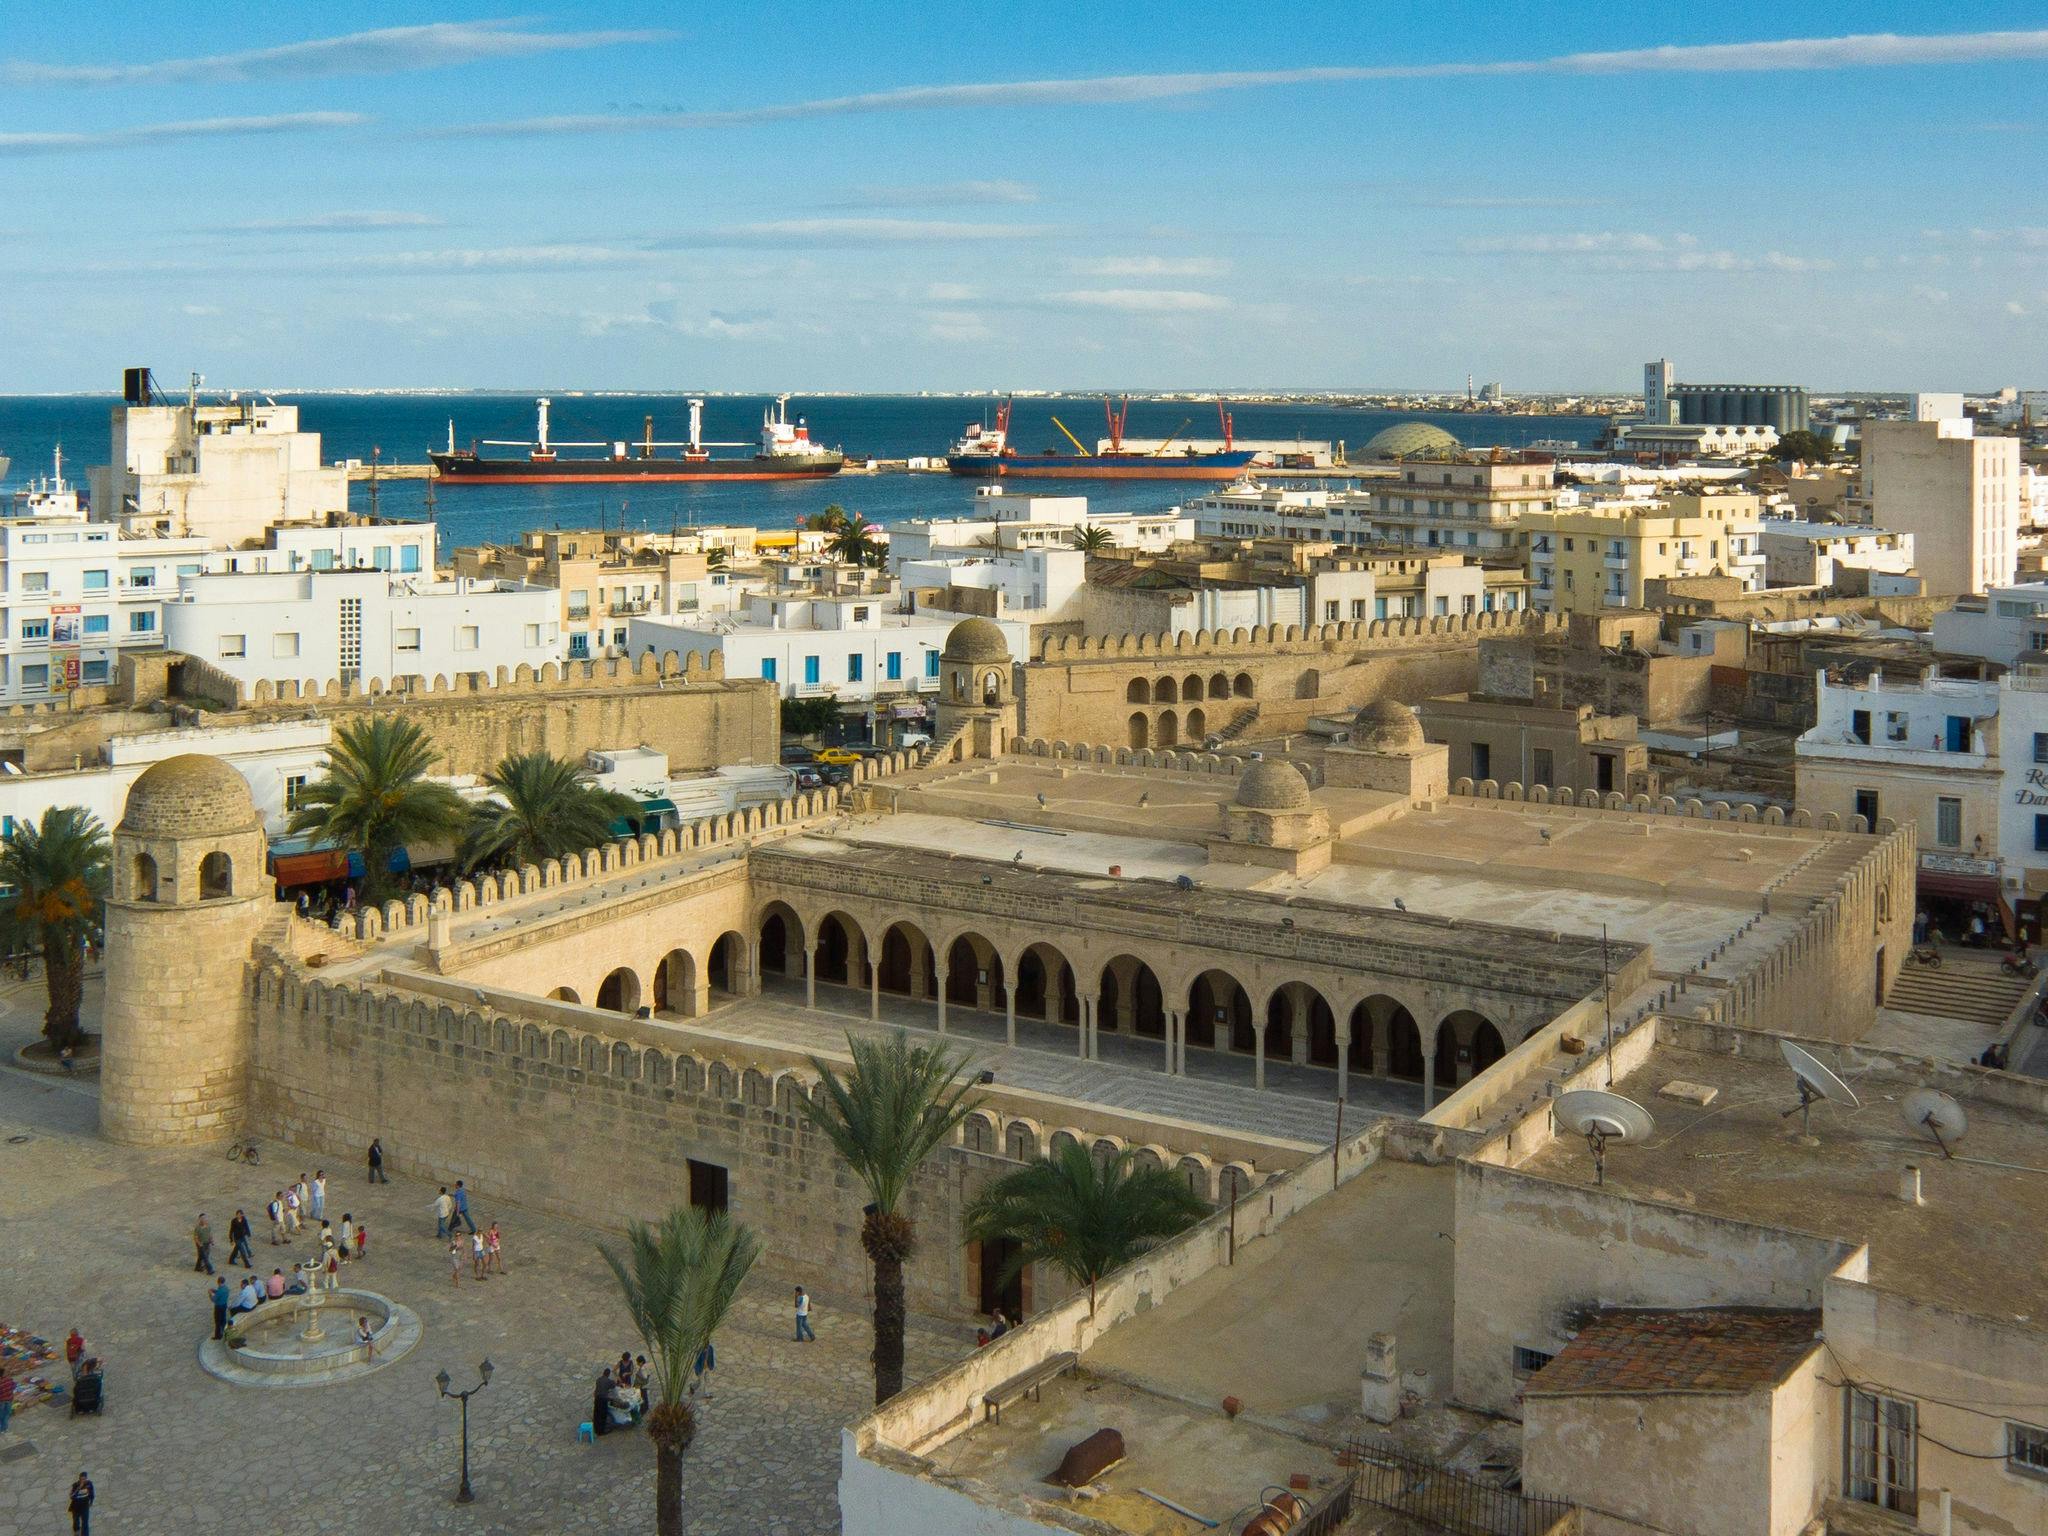 Guided tour of the Medina with pickup from Sousse